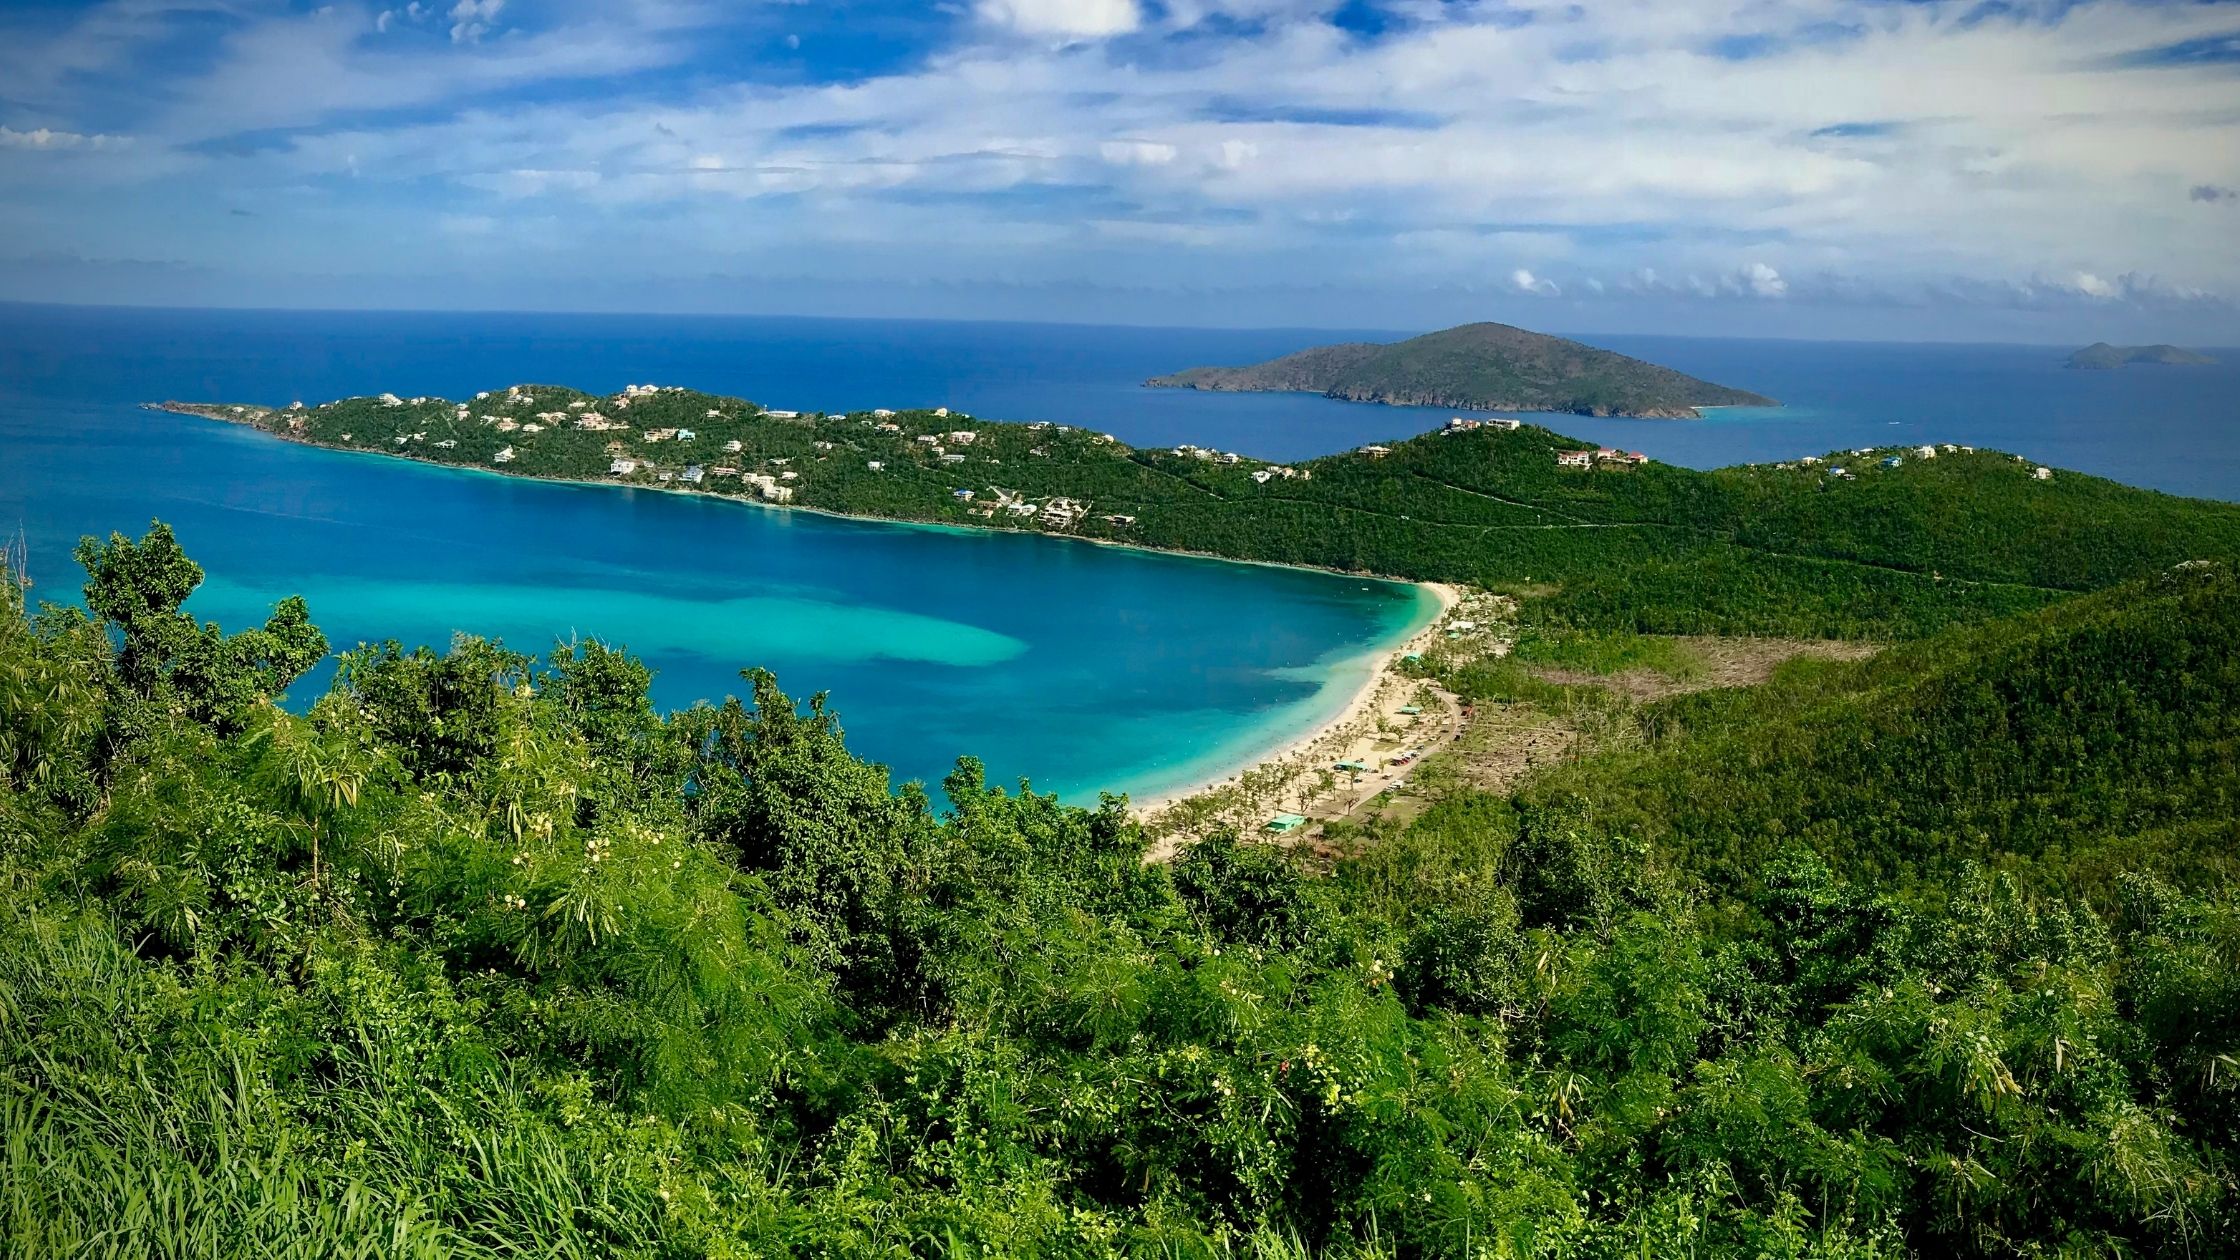 Do i need a passport to go to the u.s. virgin islands?